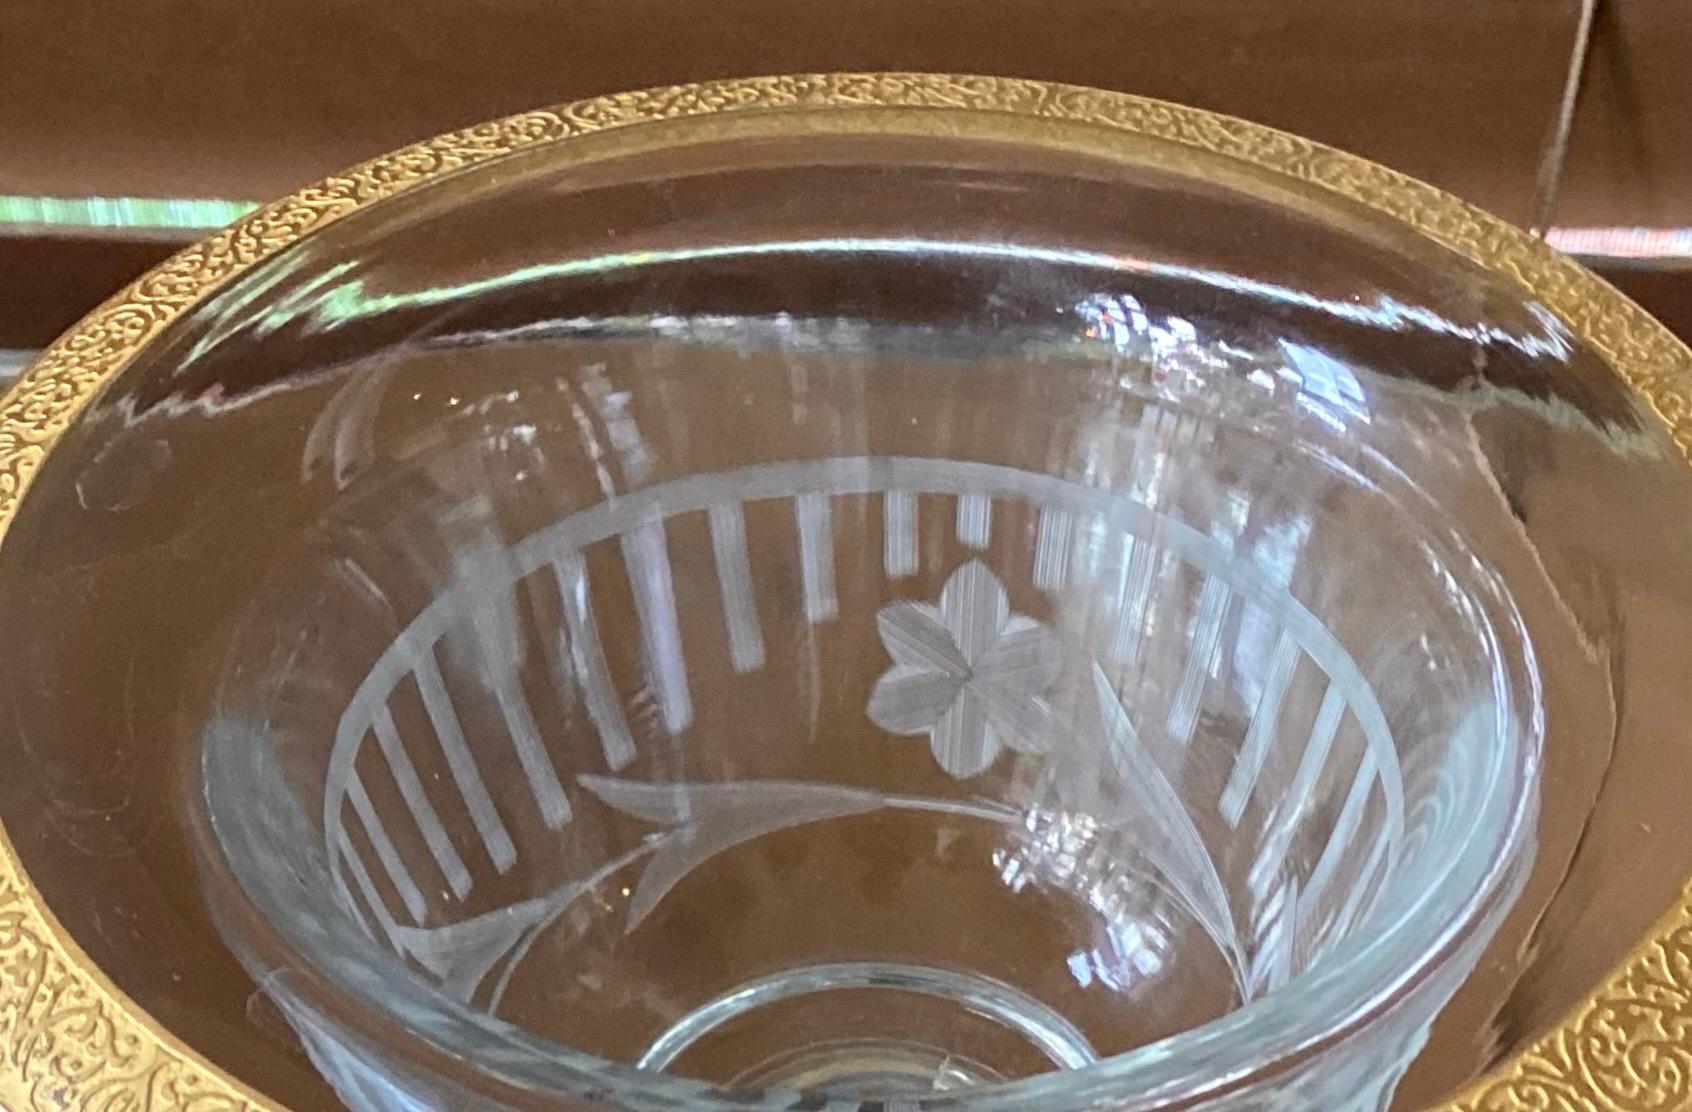 An antique chased gold encrusted console bowl made by Westmoreland in the 1910's-20's. Engraved florals and bars, or fencing, on the bowl. 

This is a lovely etched and cut footed 
bowl/compote with chased gold trim, perfect for your favorite table,